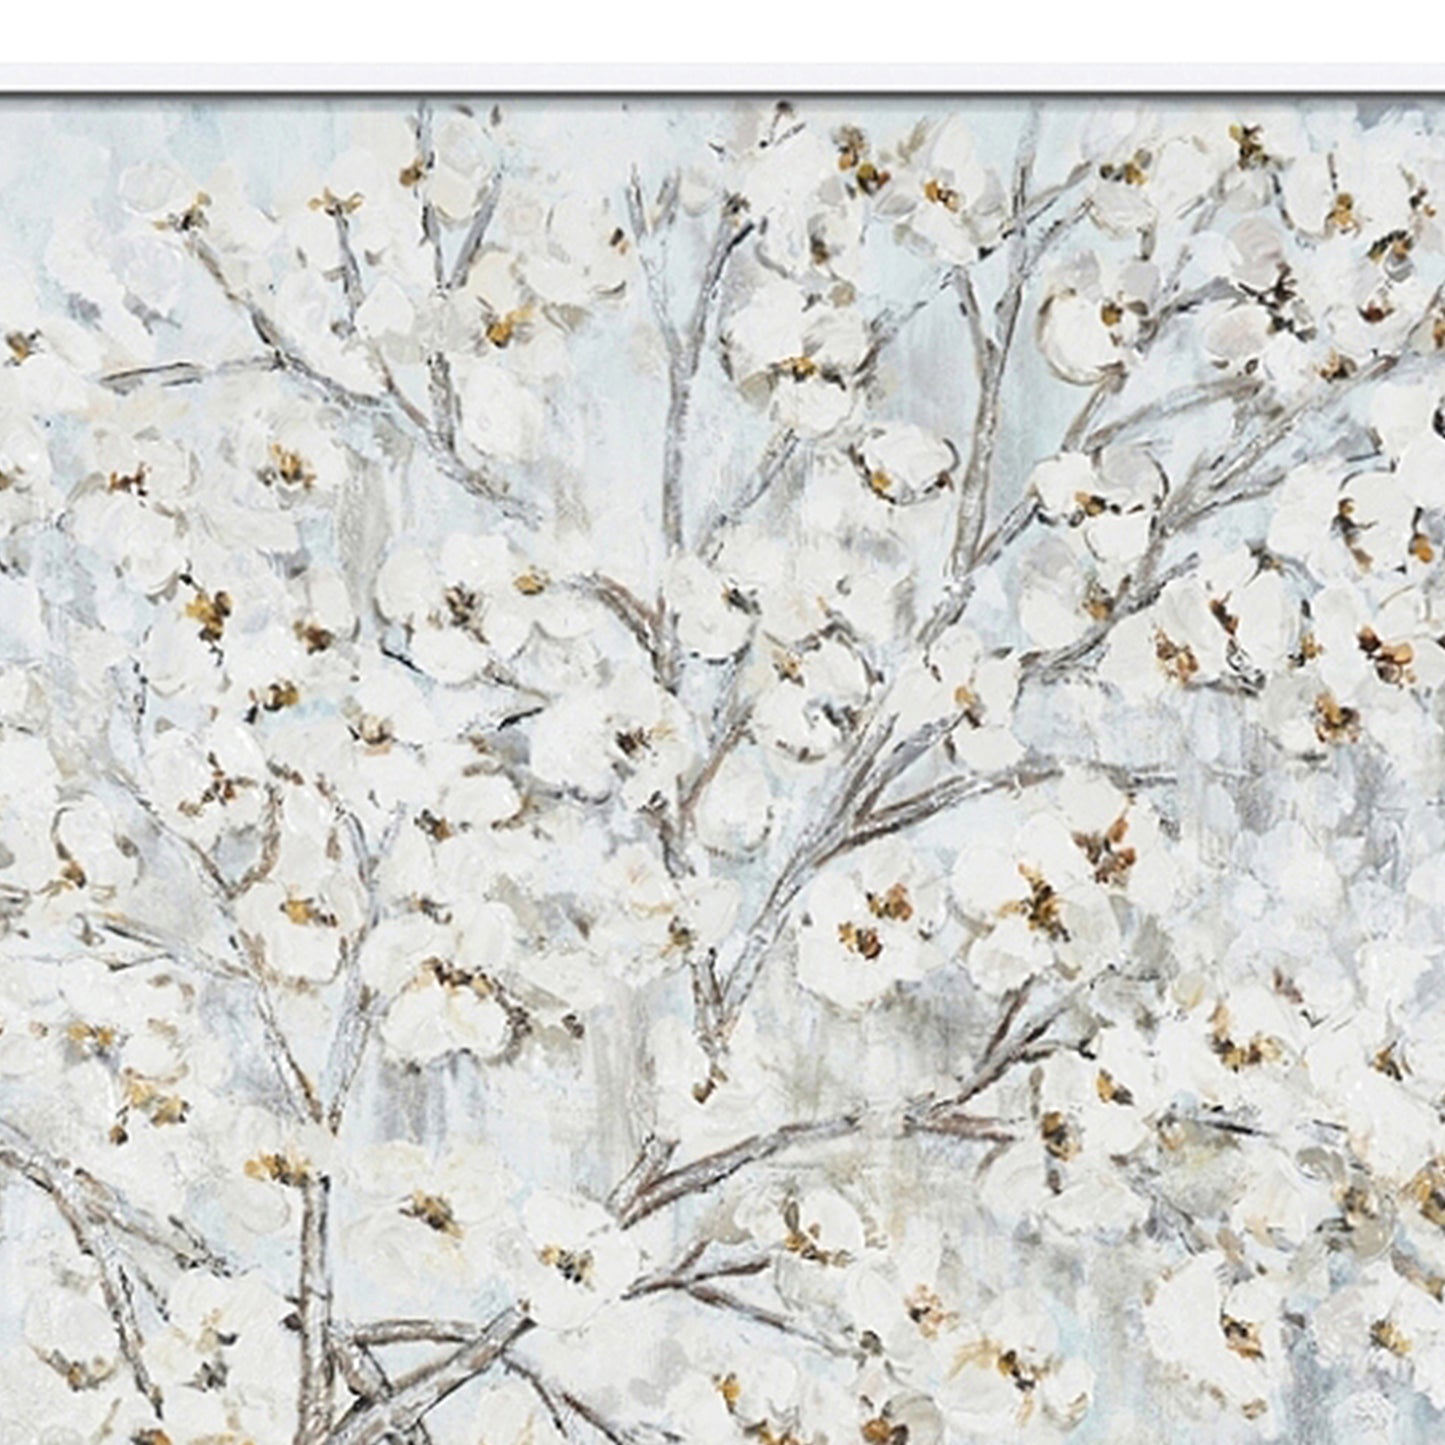 Hand Painted Acrylic Wall Art White Flower Tree on a 39 x 39 Square Canvas with a White Wooden Frame